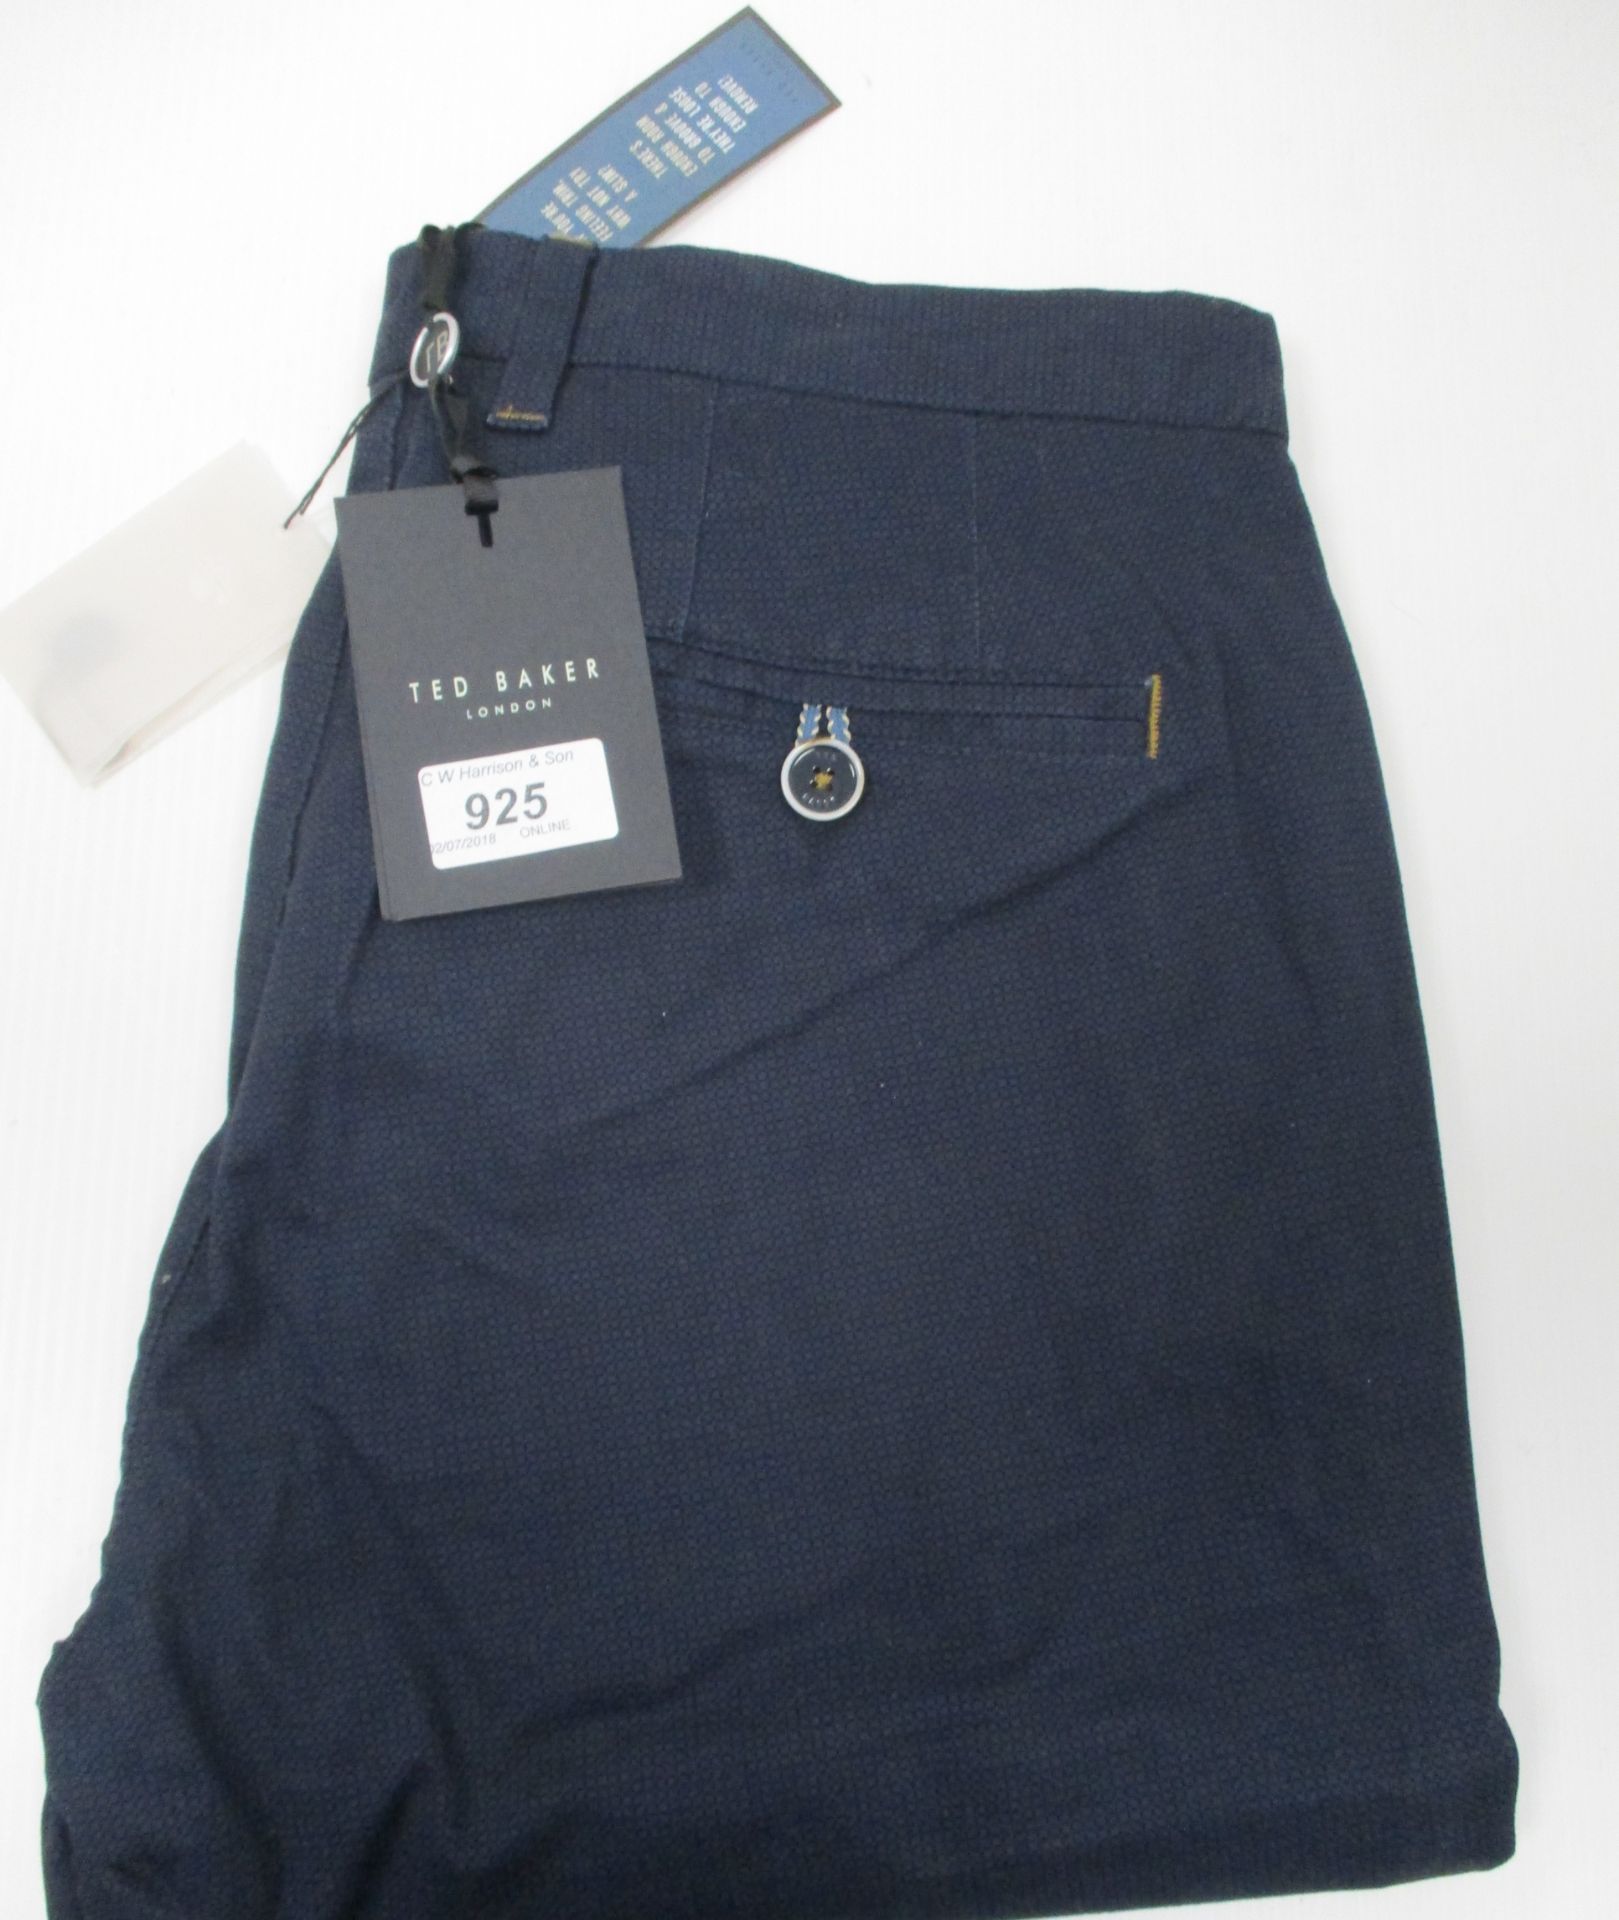 Ted Baker slim fit chino trousers - navy - 32L RRP £99